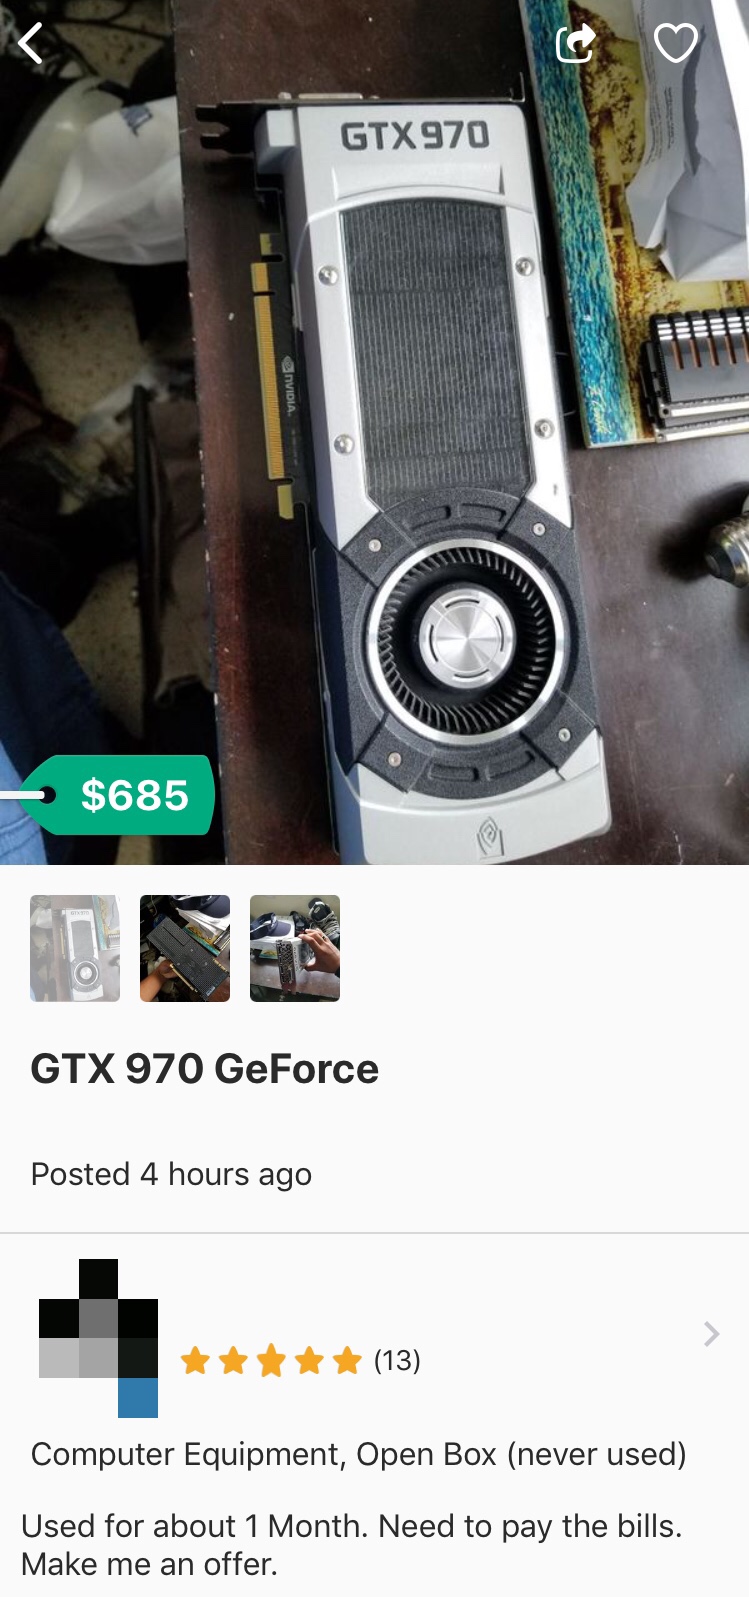 Why buy a new one for $500-$600 when you can get a used one for $685